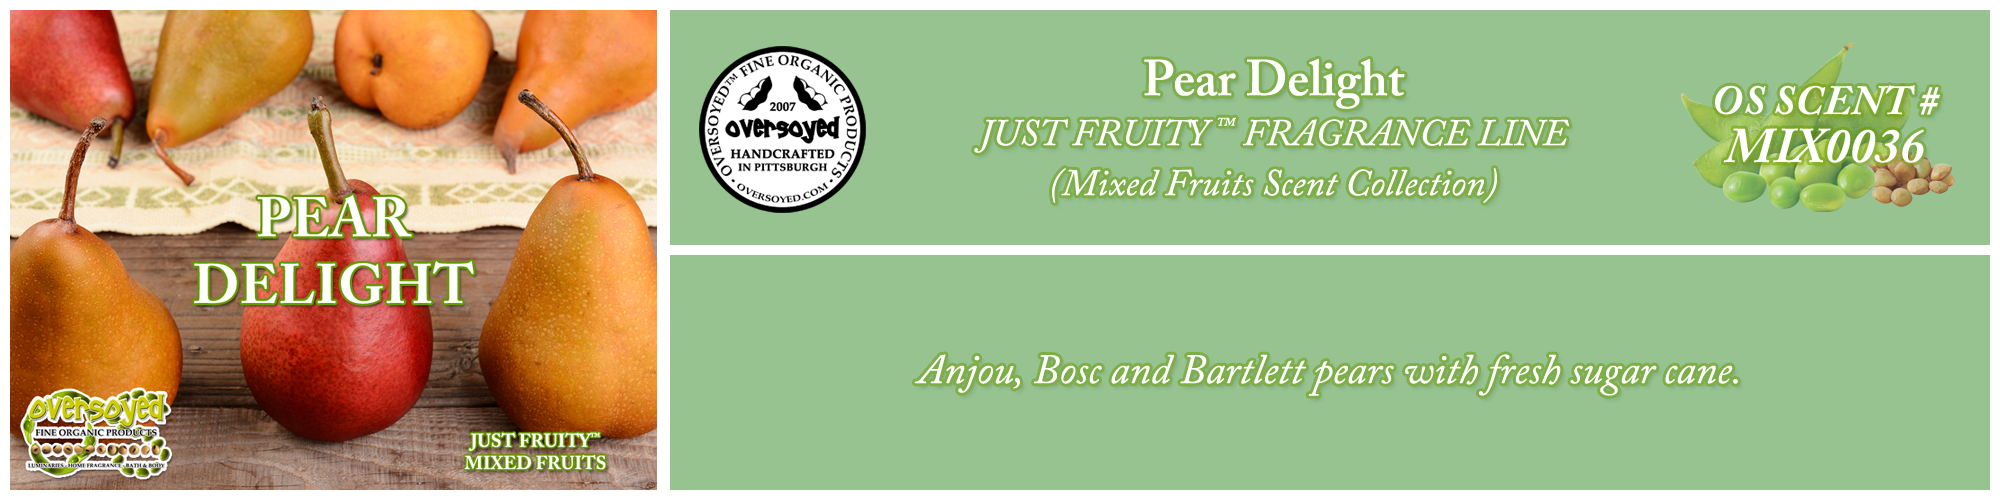 Pear Delight Handcrafted Products Collection